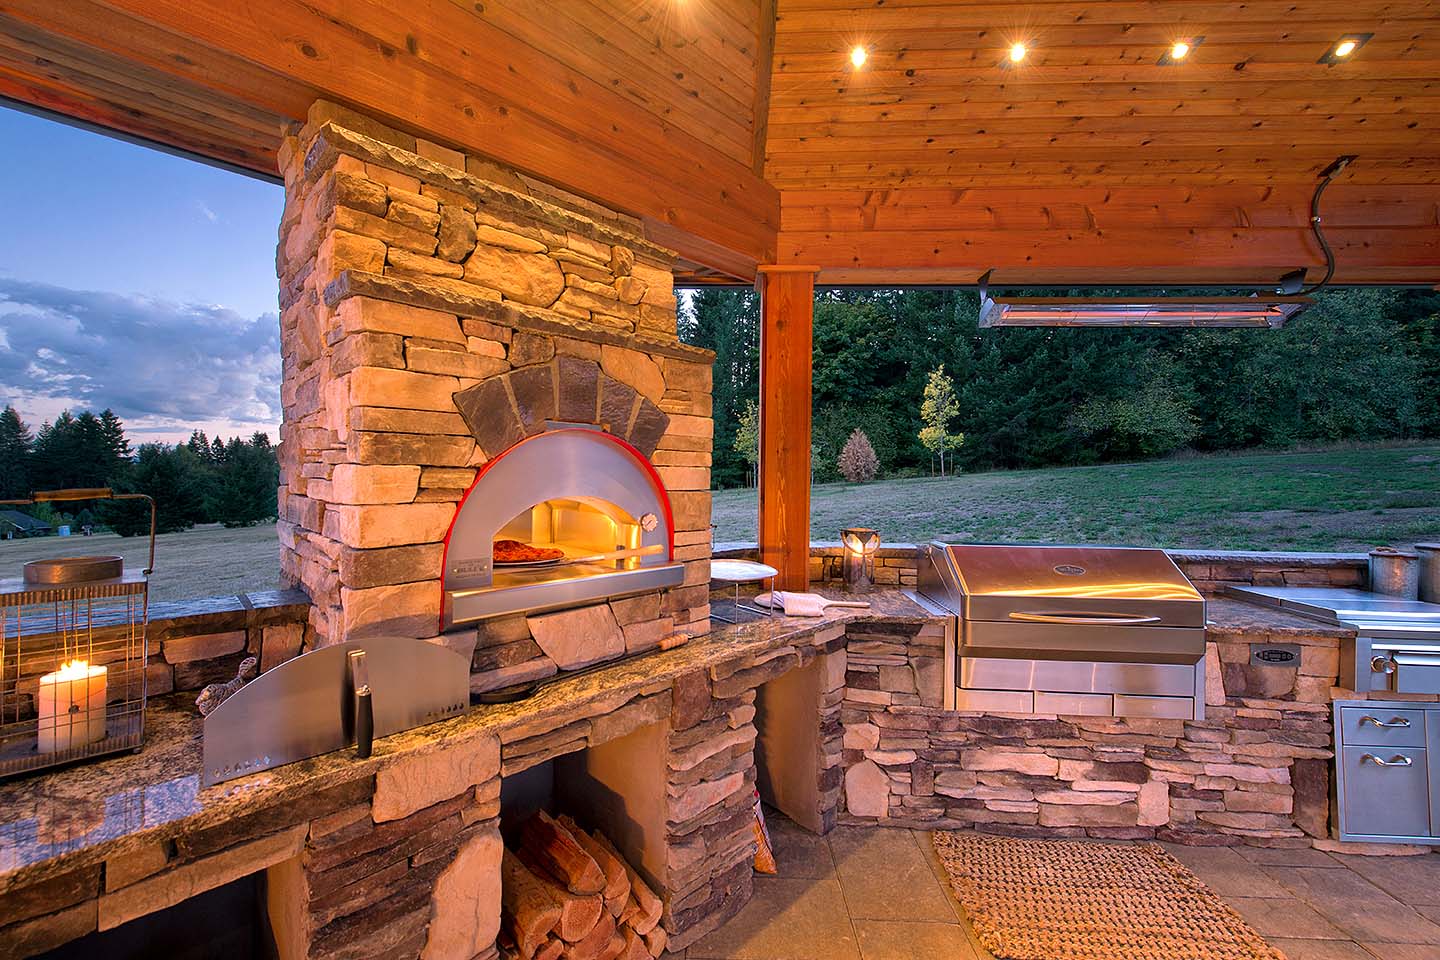 Types of Wood Ovens